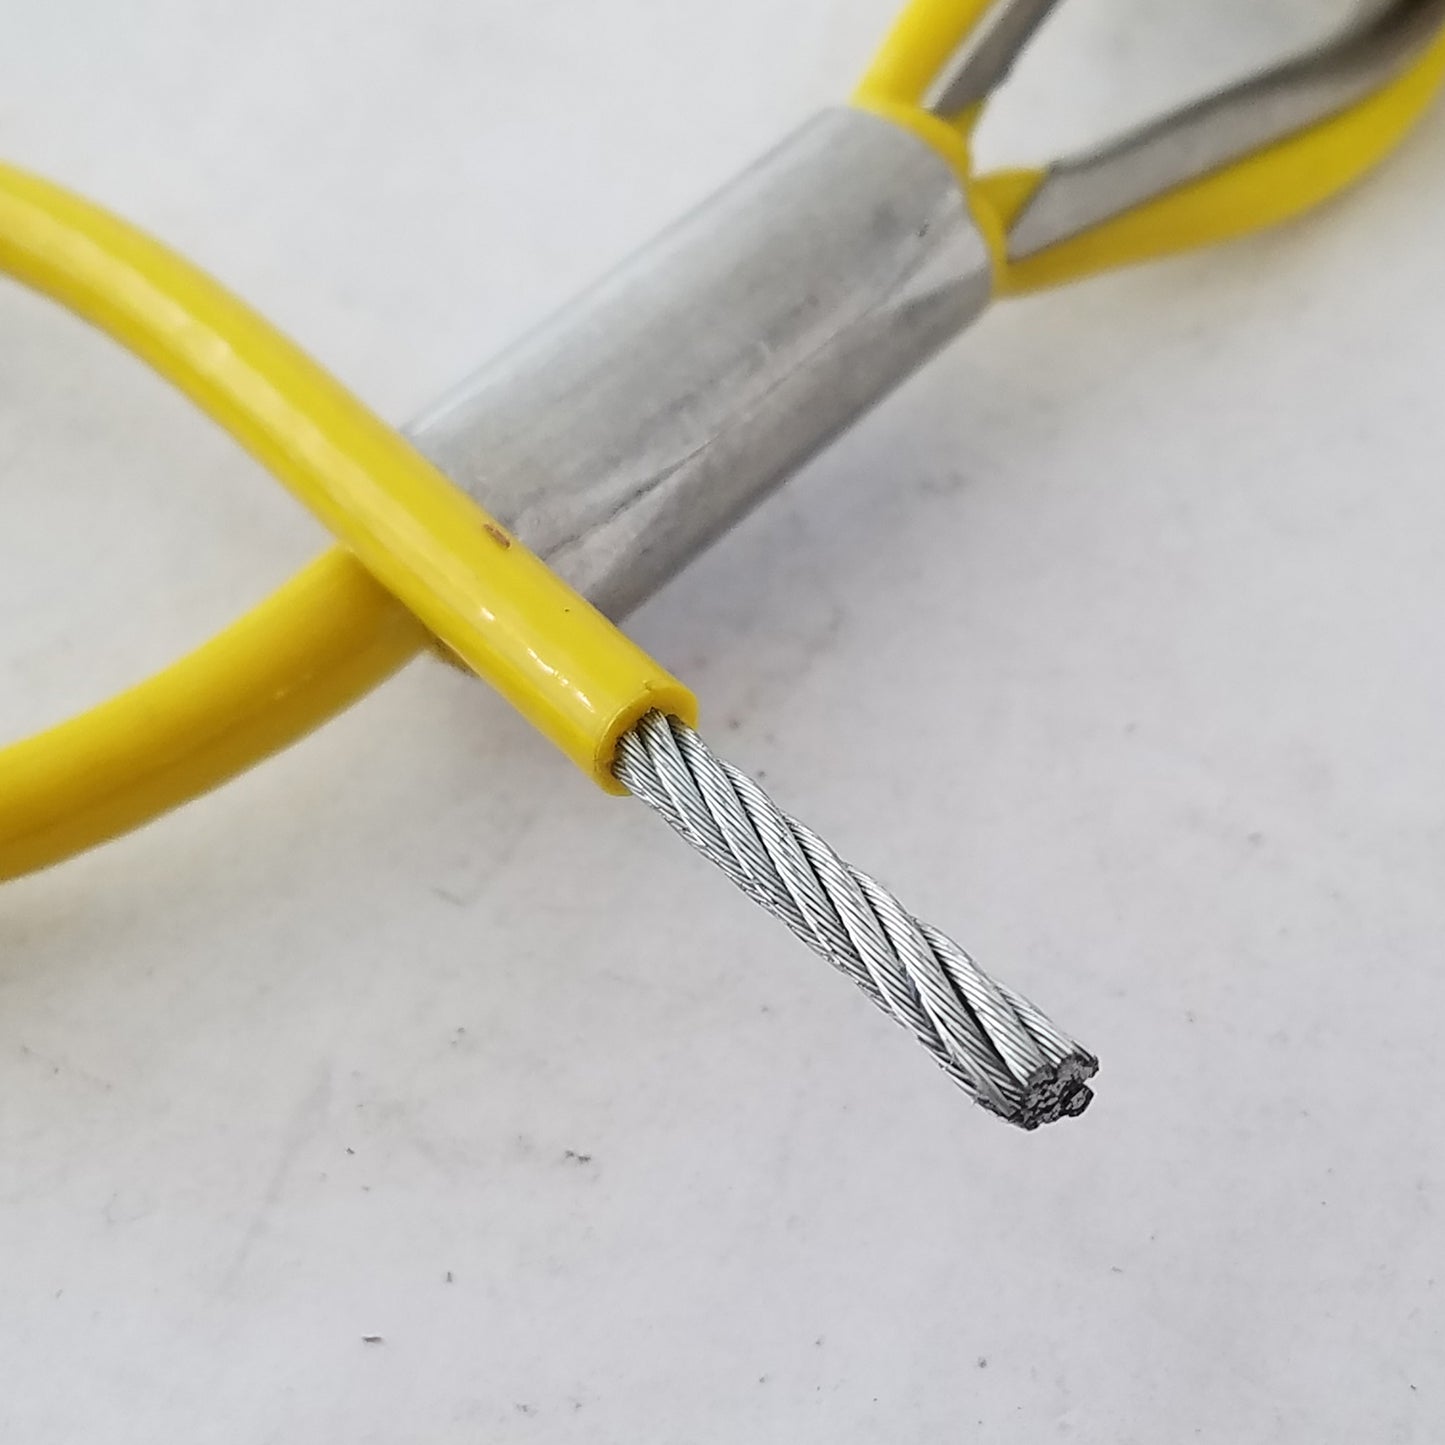 high quality braided cable stays flexible even in the freezing cold